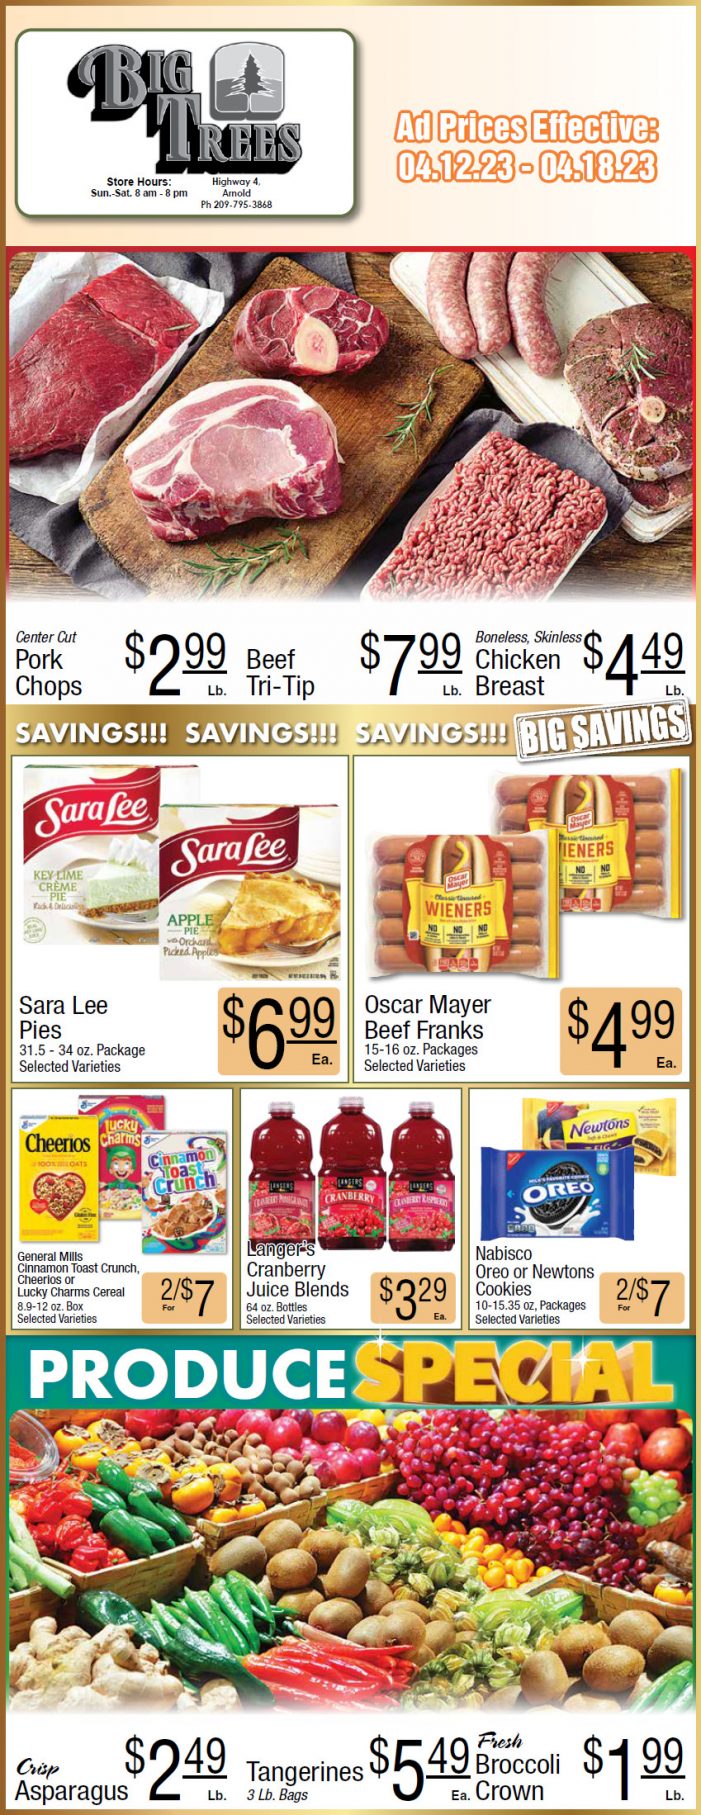 Big Trees Market Weekly Ad, Grocery, Produce, Meat & Deli Specials April 12 – 18